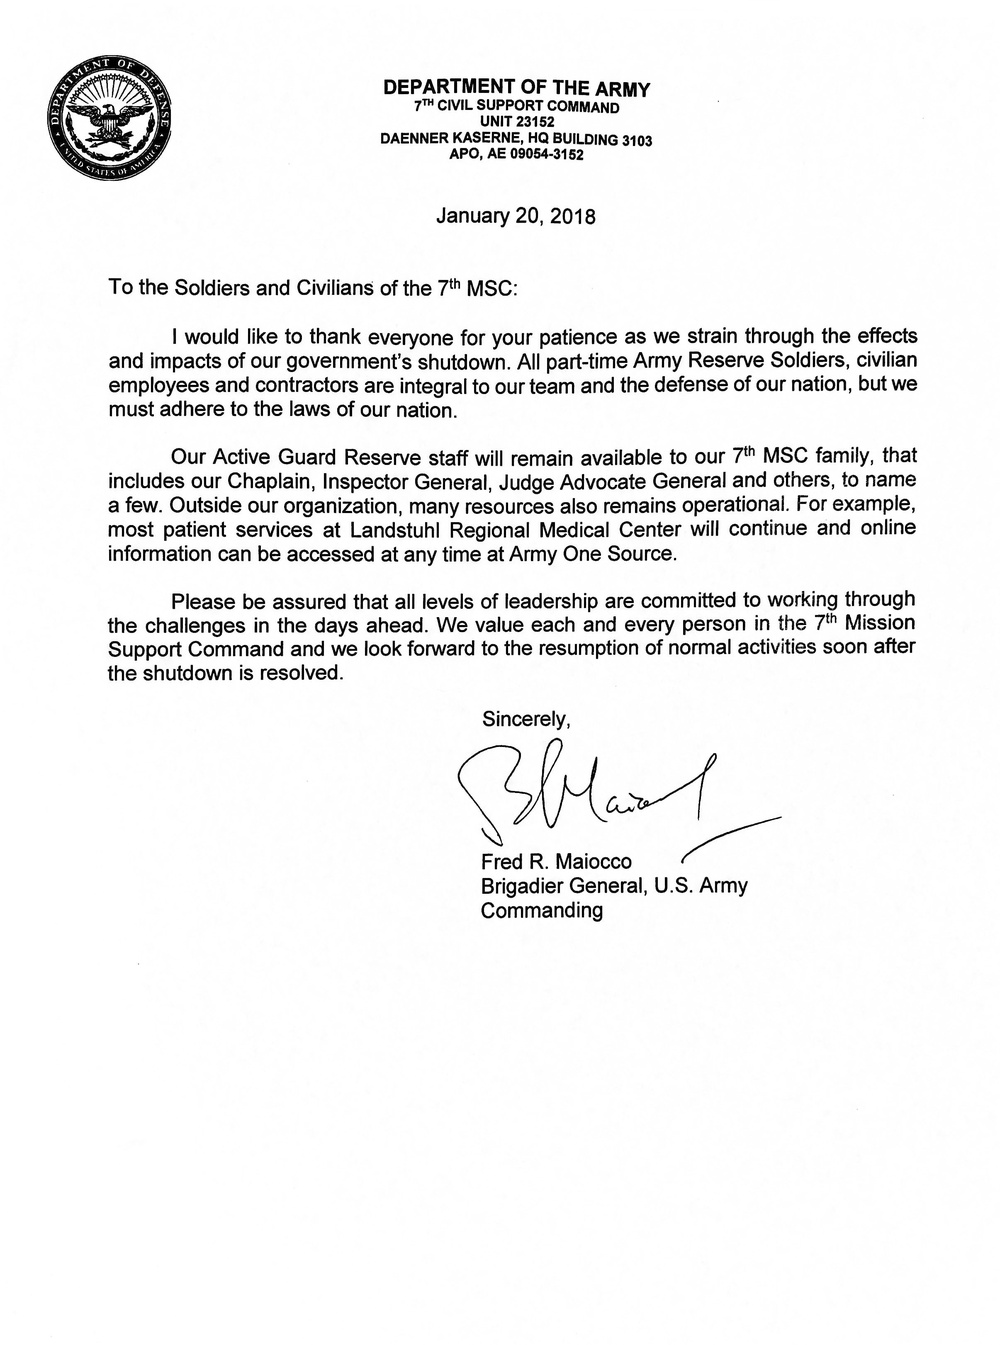 Brig. Gen. Maiocco's letter to the 7th MSC